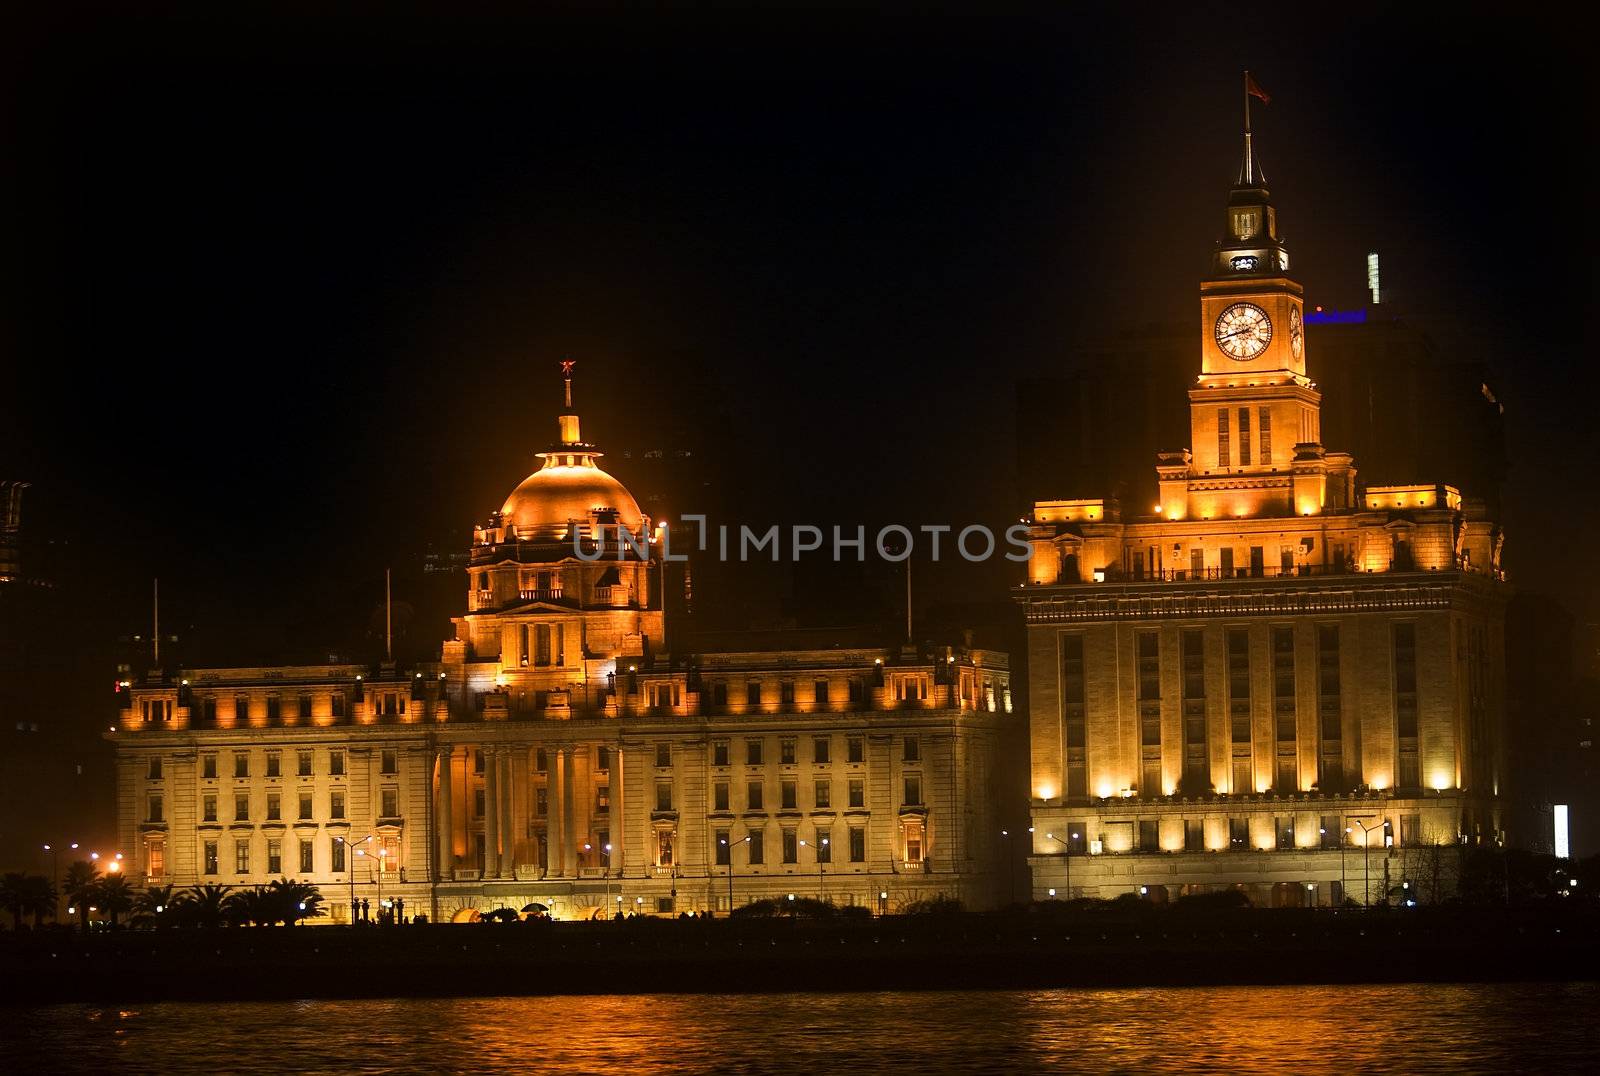 The Bund, Old Part of Shanghai, No 12 HSBC Bank Building Old Customs House At Night 
Buildings were built in the 1920s and 1930s.  HSBC Bank Building was taken over by the Chinese government in 1949 and became the Shanghai City Government building.